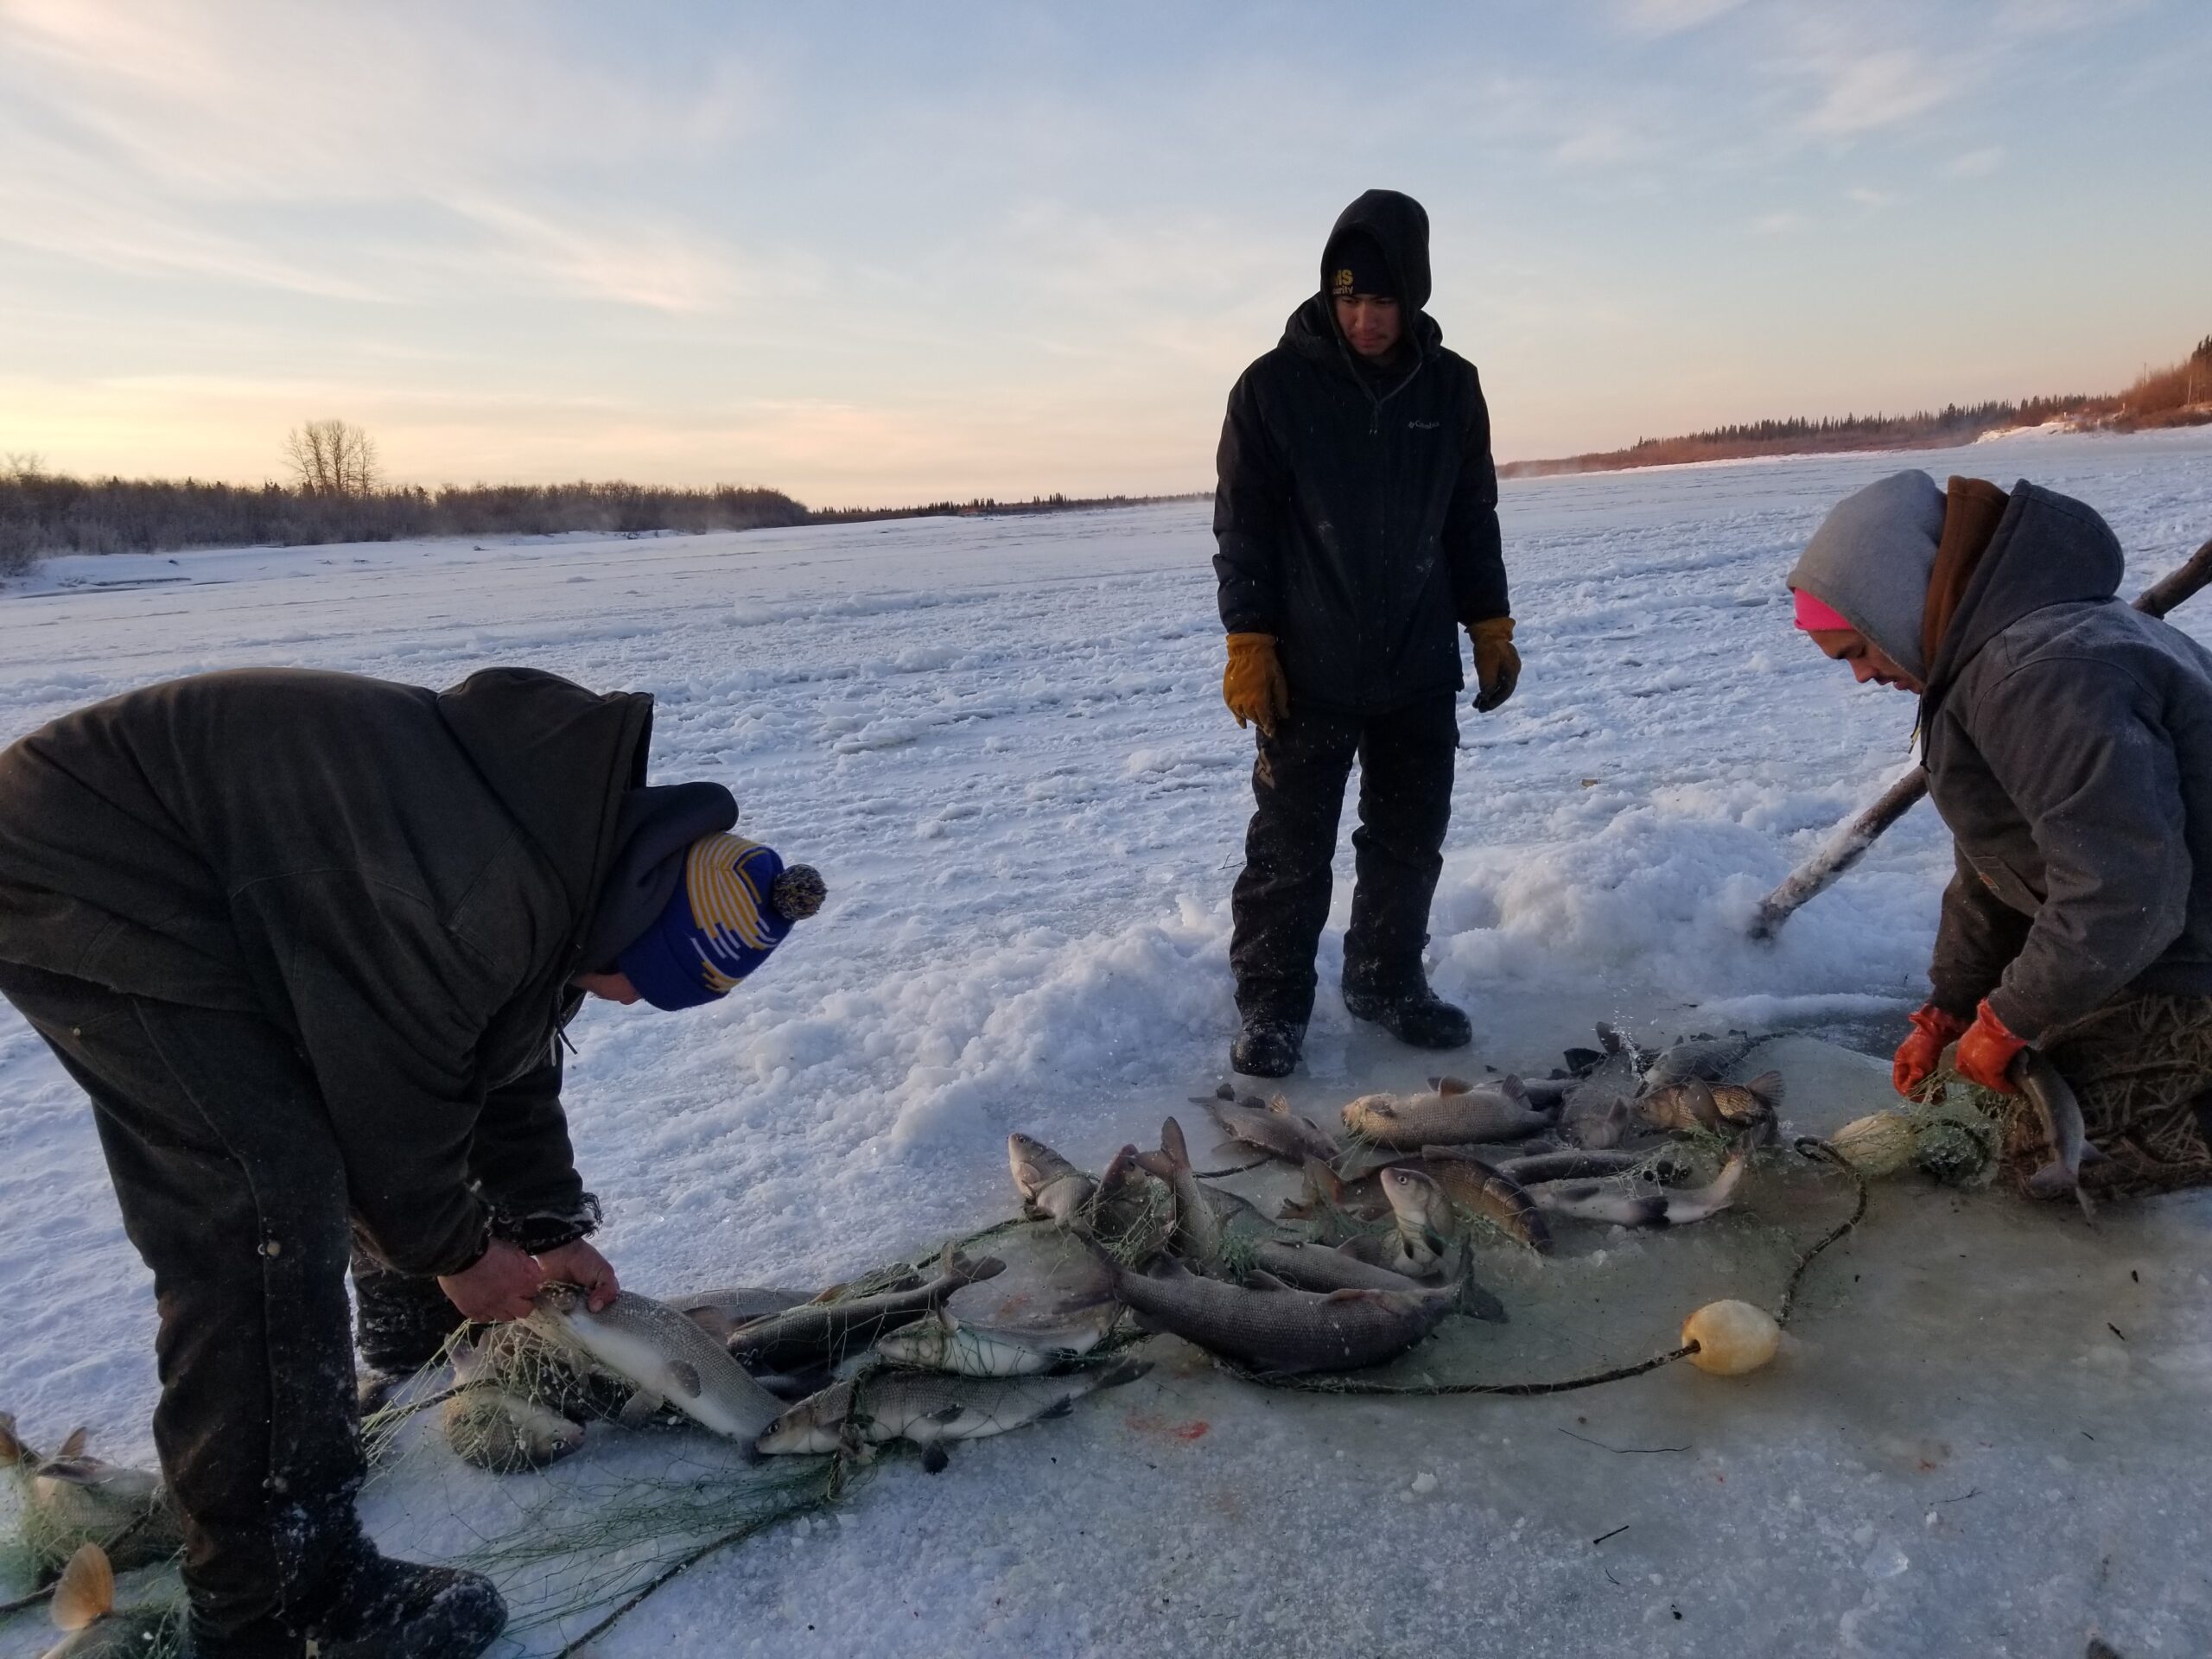 Three men in winter gear stand on a frozen river, gathered around several fish pulled out of a hole carved into the ice.